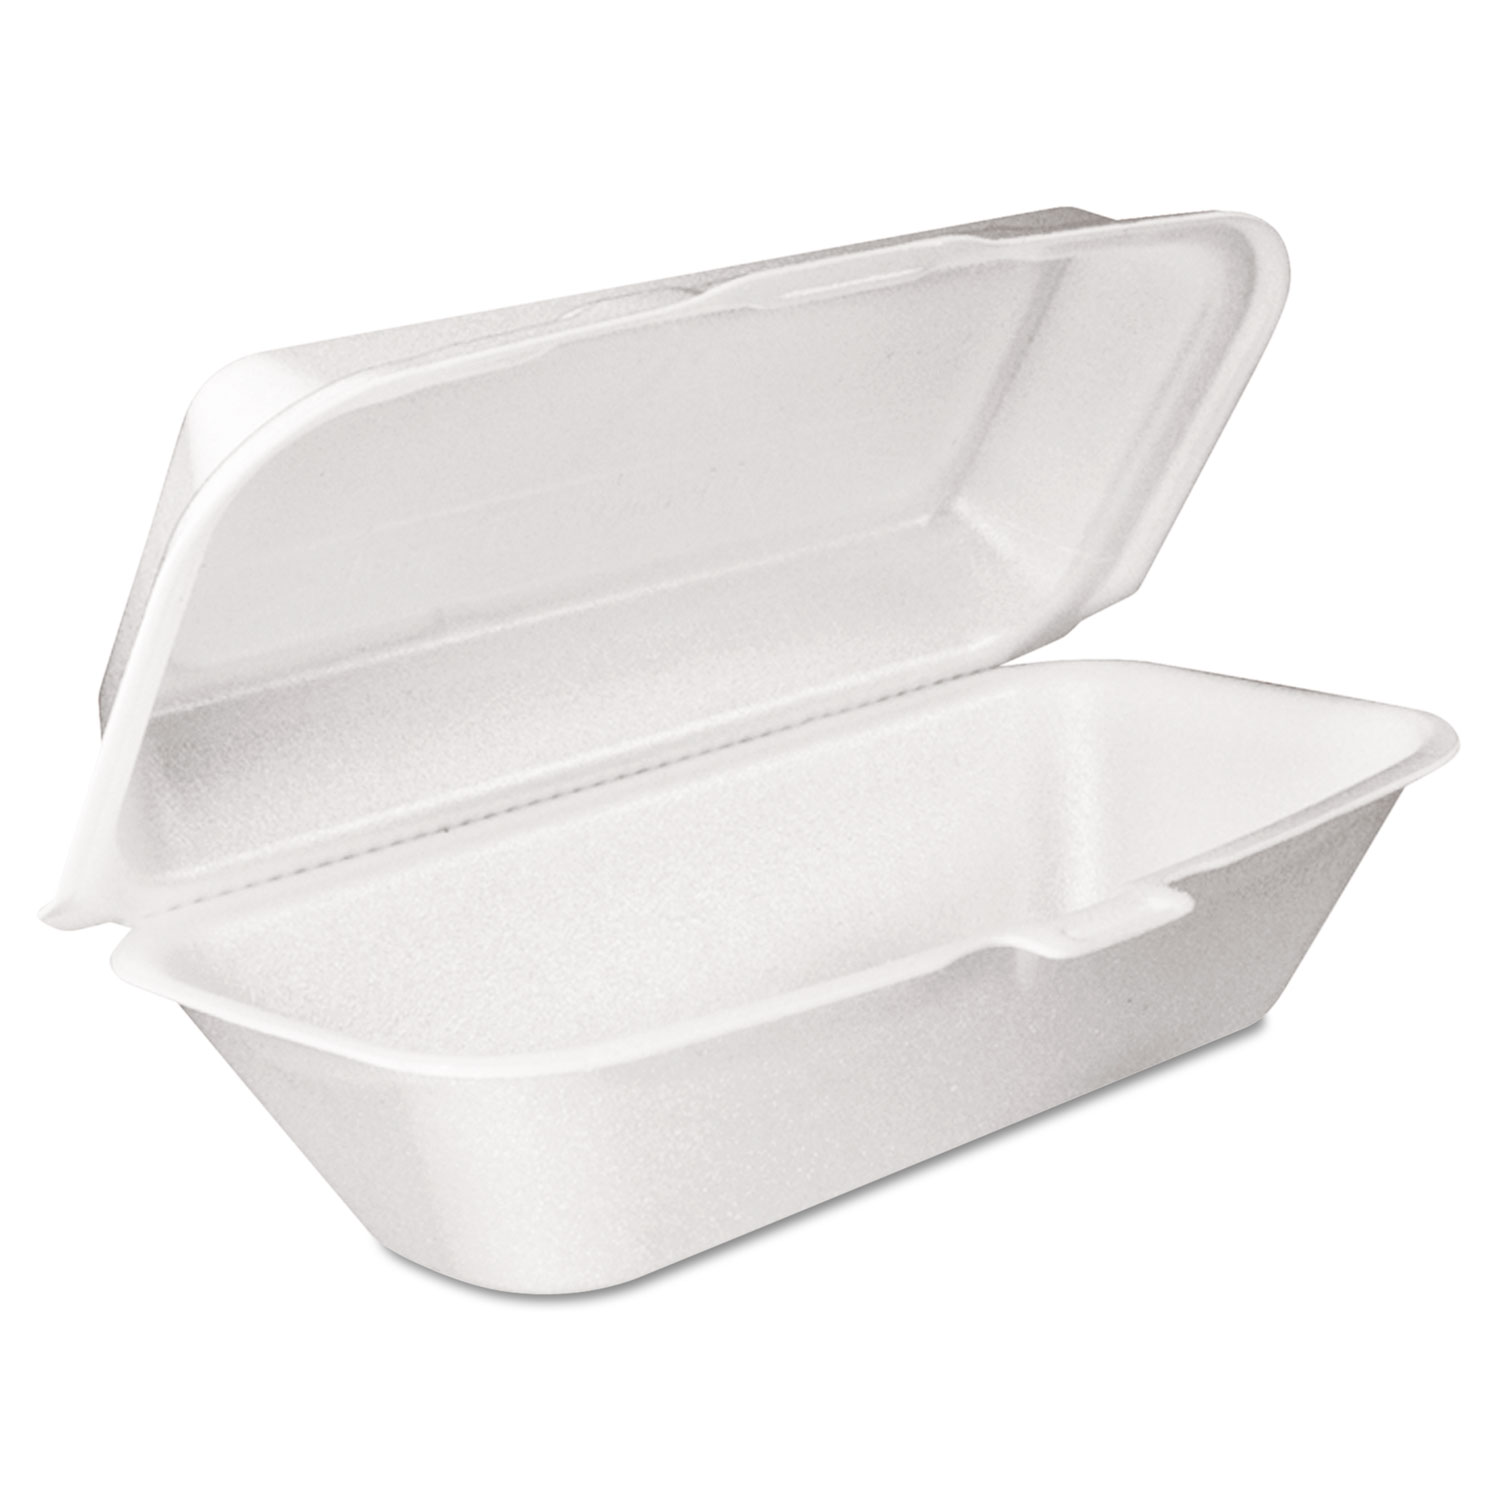 Foam Hoagie Container with Removable Lid, 9-4/5x5-3/10x3-3/10, White, 125/Bag